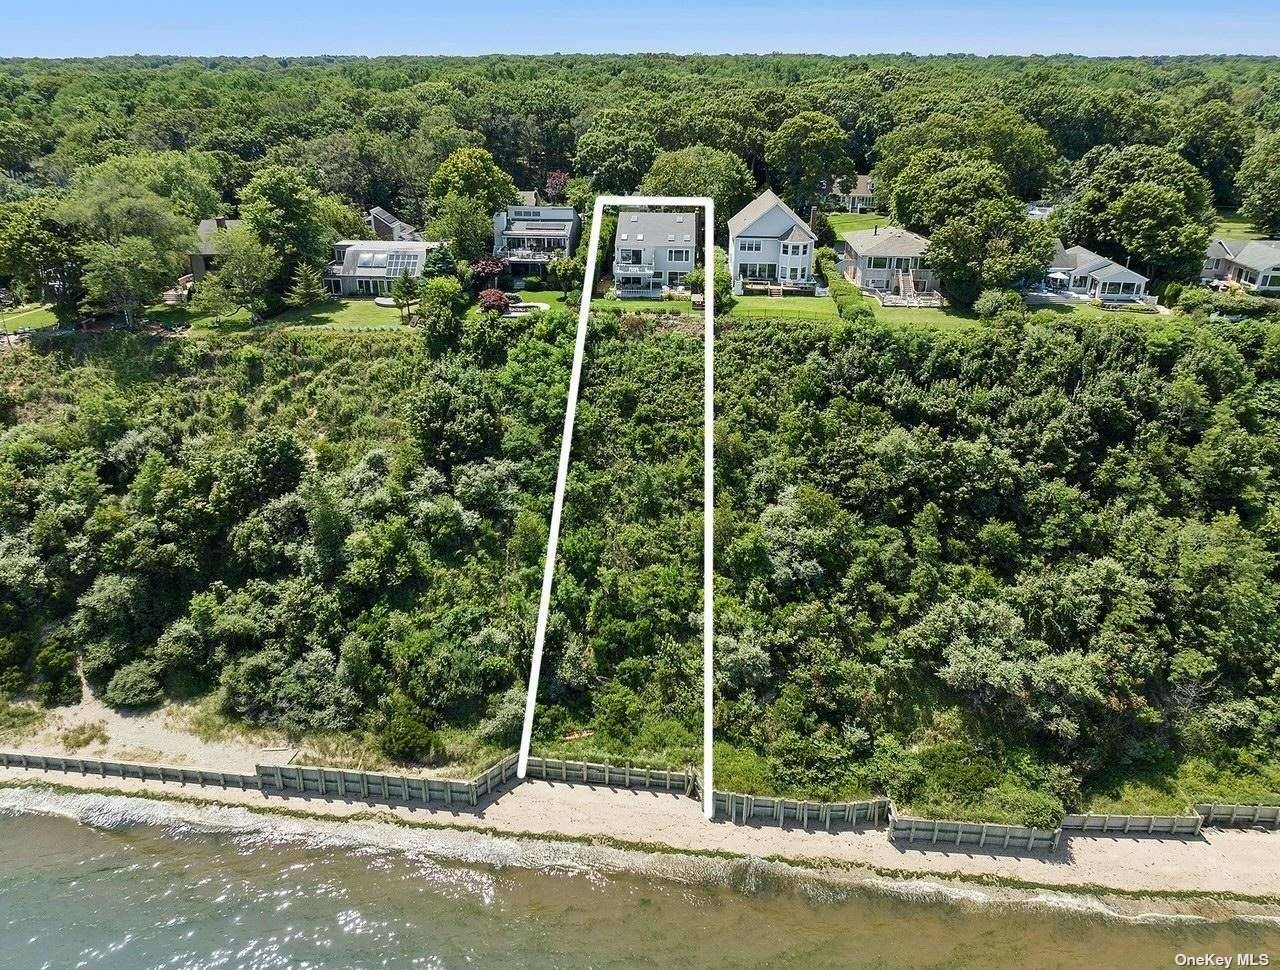 Do you want to enjoy breathtaking views of the Long Island Sound ?